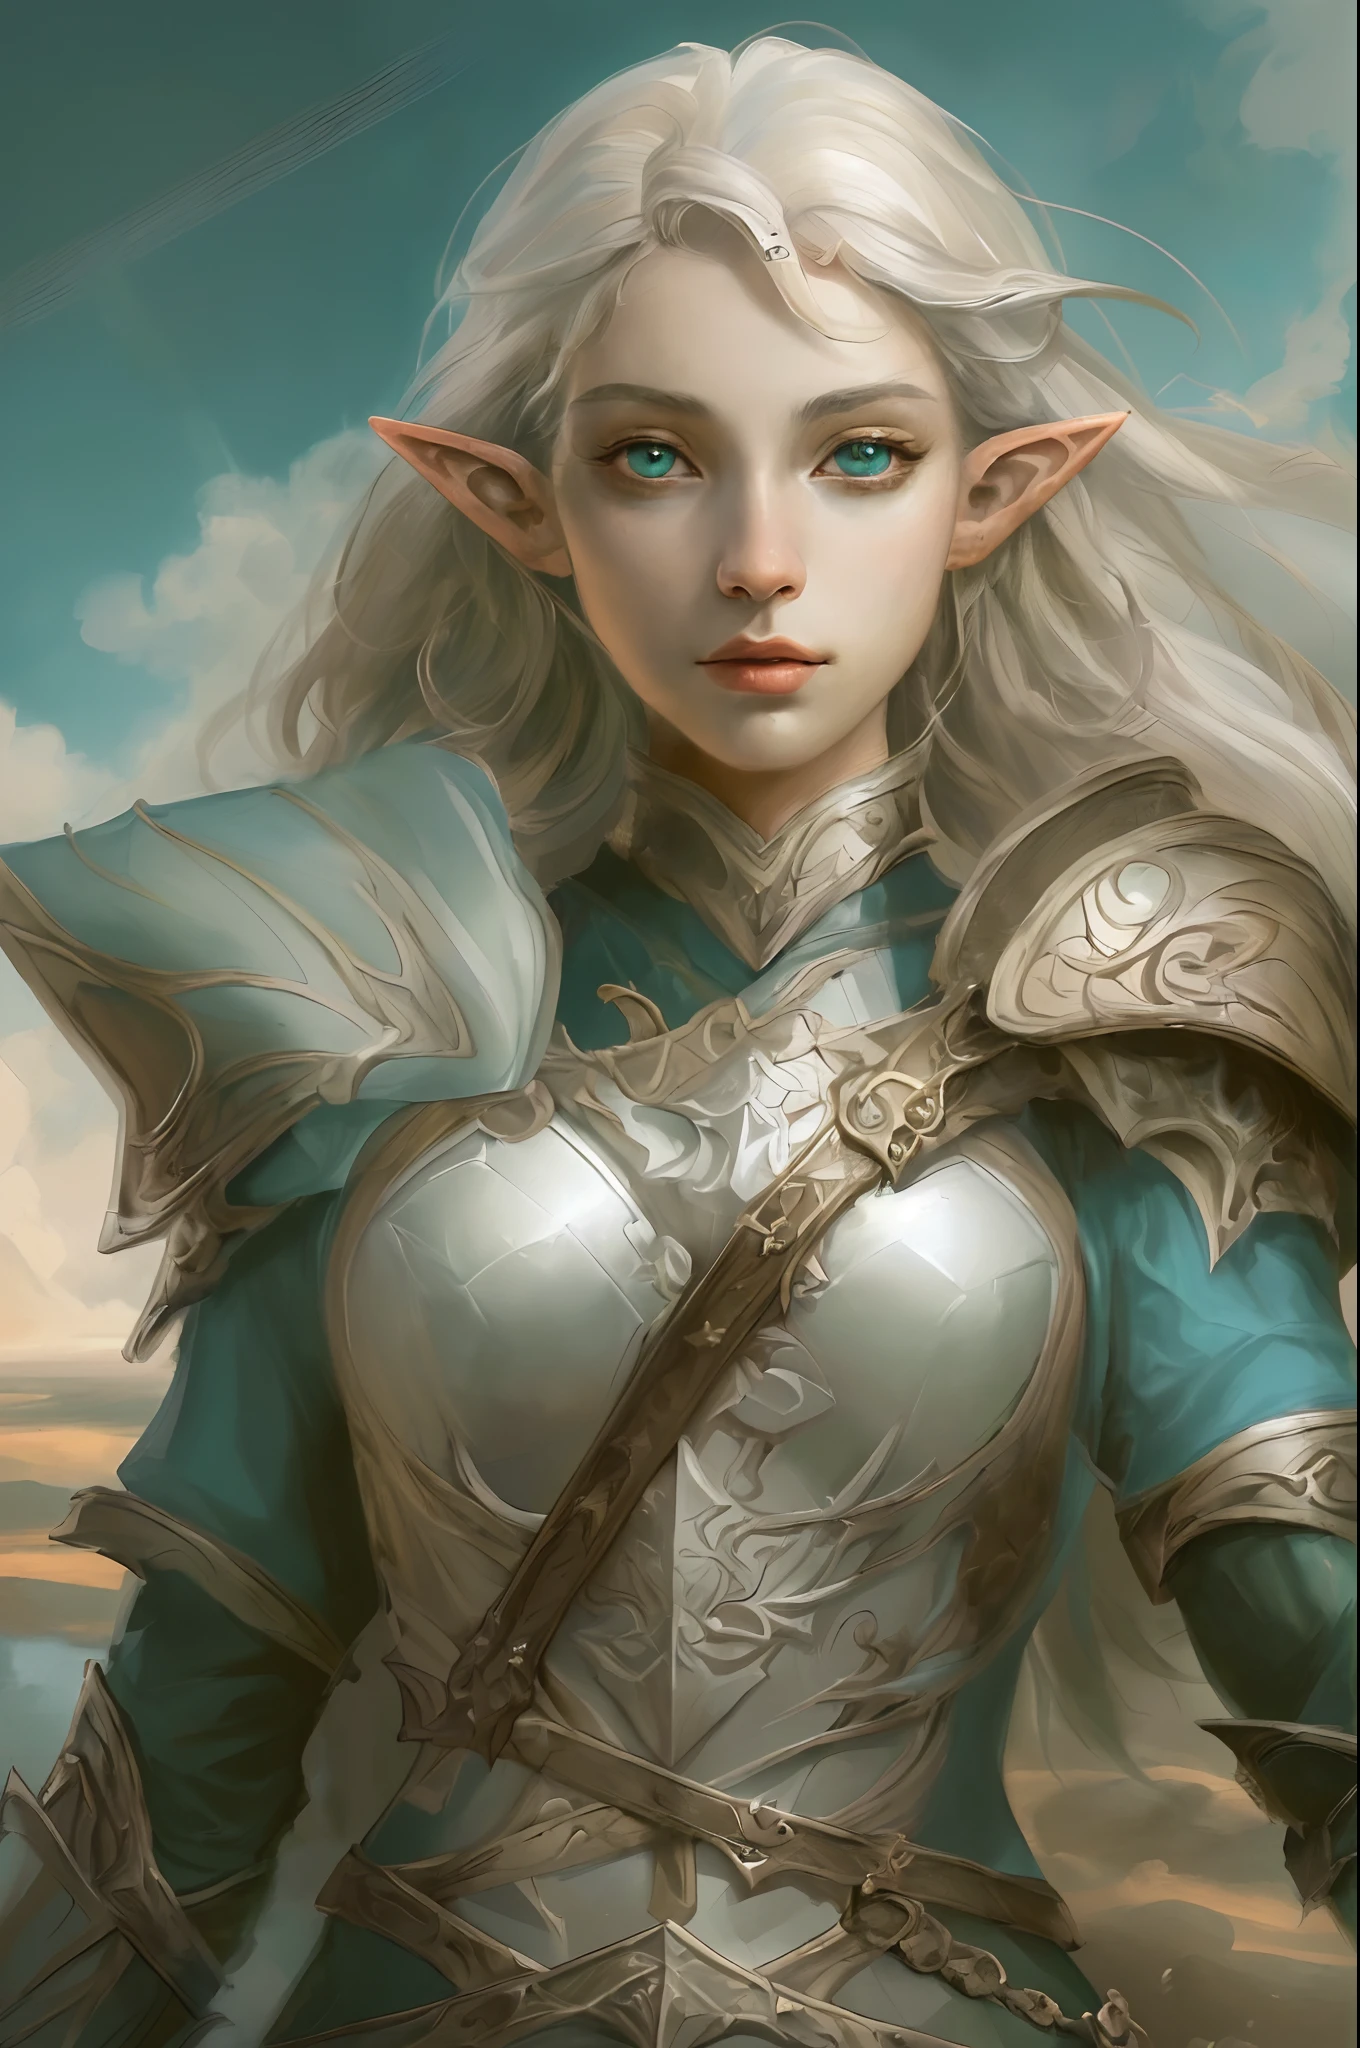 high details, best quality, 8k, [ultra detailed], masterpiece, best quality, (extremely detailed), dynamic angle, ultra wide shot, RAW, photorealistic, fantasy art, dnd art, rpg art, realistic art, a wide angle picture of an epic female elf , anatomically correct a picture of an elf knight, elf warrior, elite warrior, ready for battle (intense details, Masterpiece, best quality: 1.5), female elf (intense details, Masterpiece, best quality: 1.5), ultra detailed face, ultra feminine, fair skin, exquisite beauty, gold hair, long hair, wavy hair, small pointed ears, dynamic eyes color, wearing heavy elven armor, shinning metal, armed with elven sword fantasysword sword, standing near a unicorn, green meadows, blue skies background and some clouds background depth of field (intricate details, Masterpiece, best quality: 1.5), dynamic angle, (intricate details, Masterpiece, best quality: 1.5), high details, best quality, highres, ultra wide angle